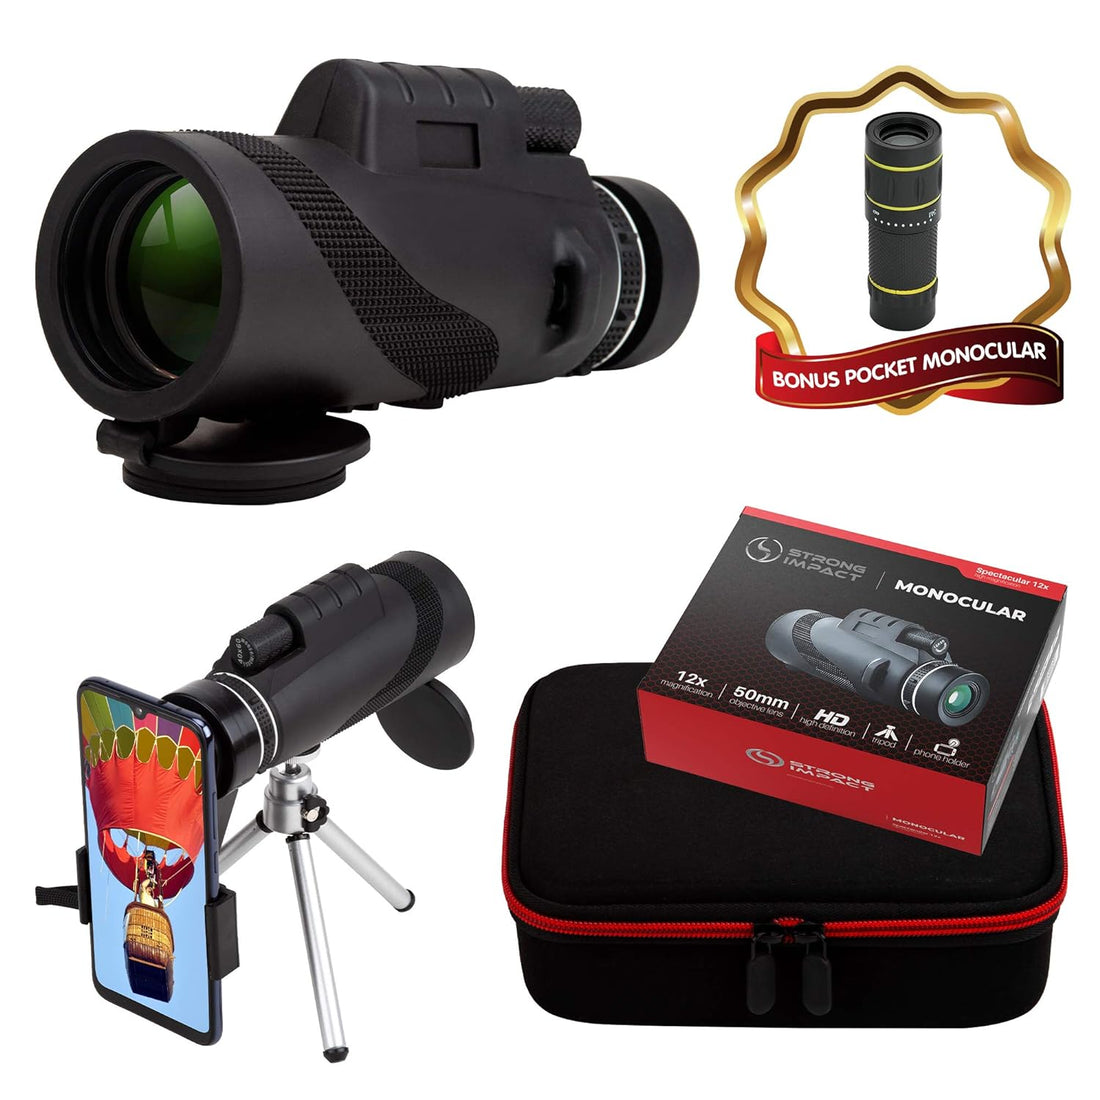 Monocular by Strong Impact, Monocular Compact Scope, High Power monocular Telescope, Zoom Monocular for Adults. 12x Magnification Zoom Lens, High Definition with Multi-Coated Lens, Carrying case